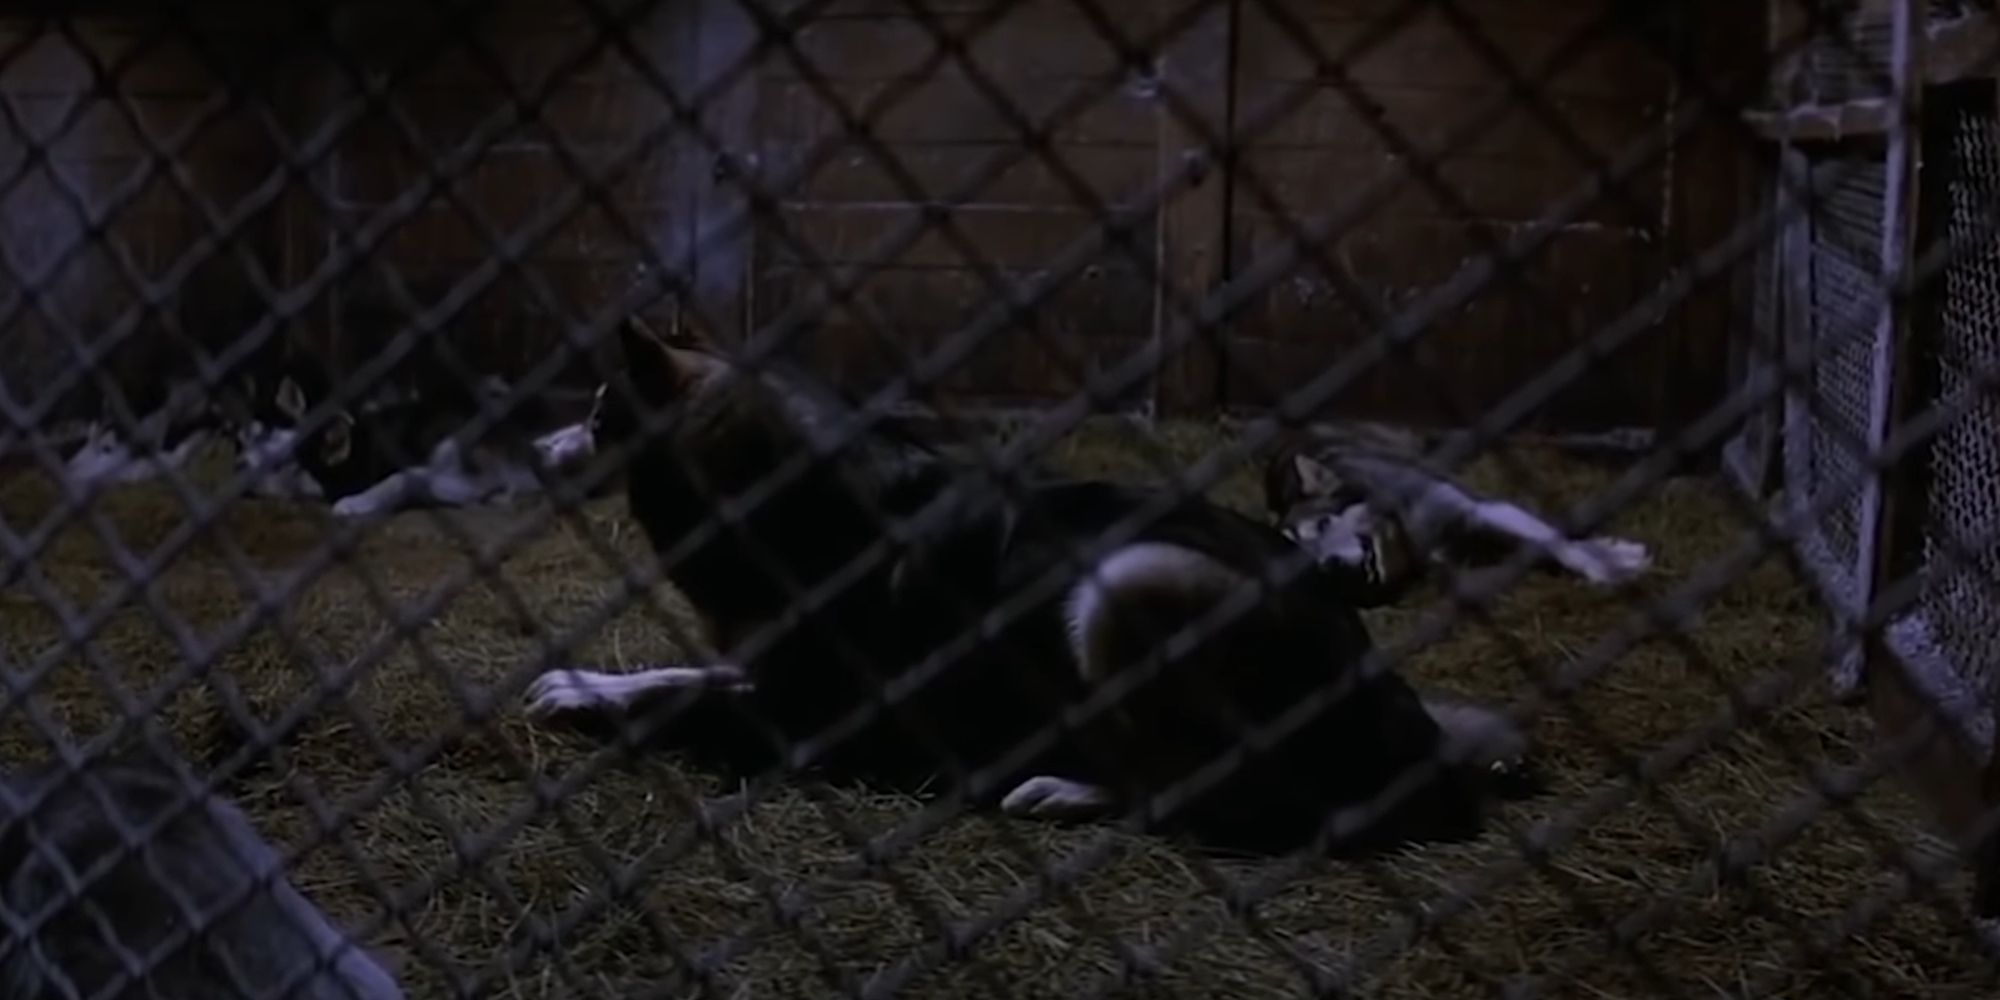 The Dog-Thing with the rest of the dogs in the kennel in John Carpenter's The Thing